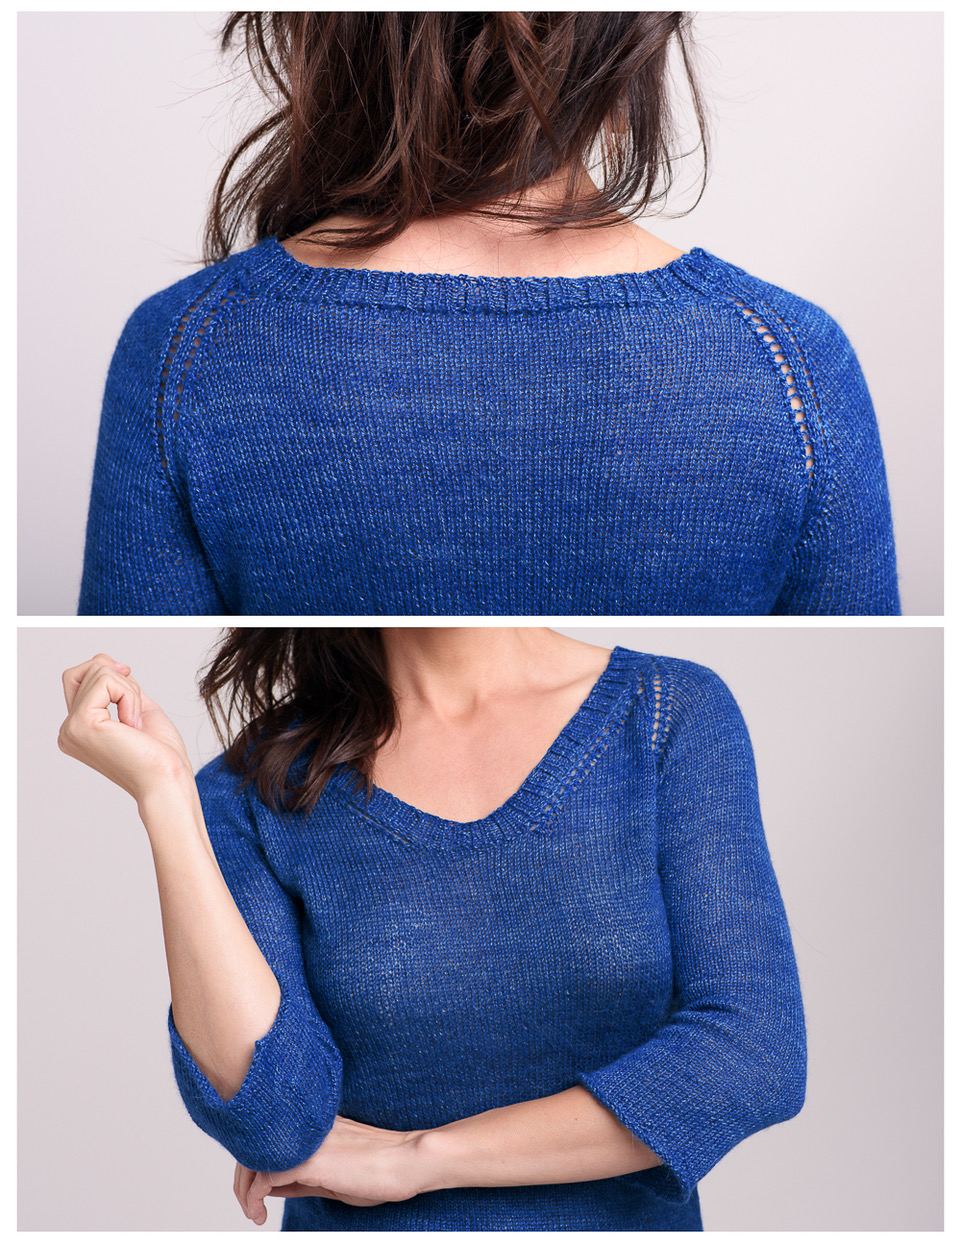 Sevenlace knitted sweater pullover pattern